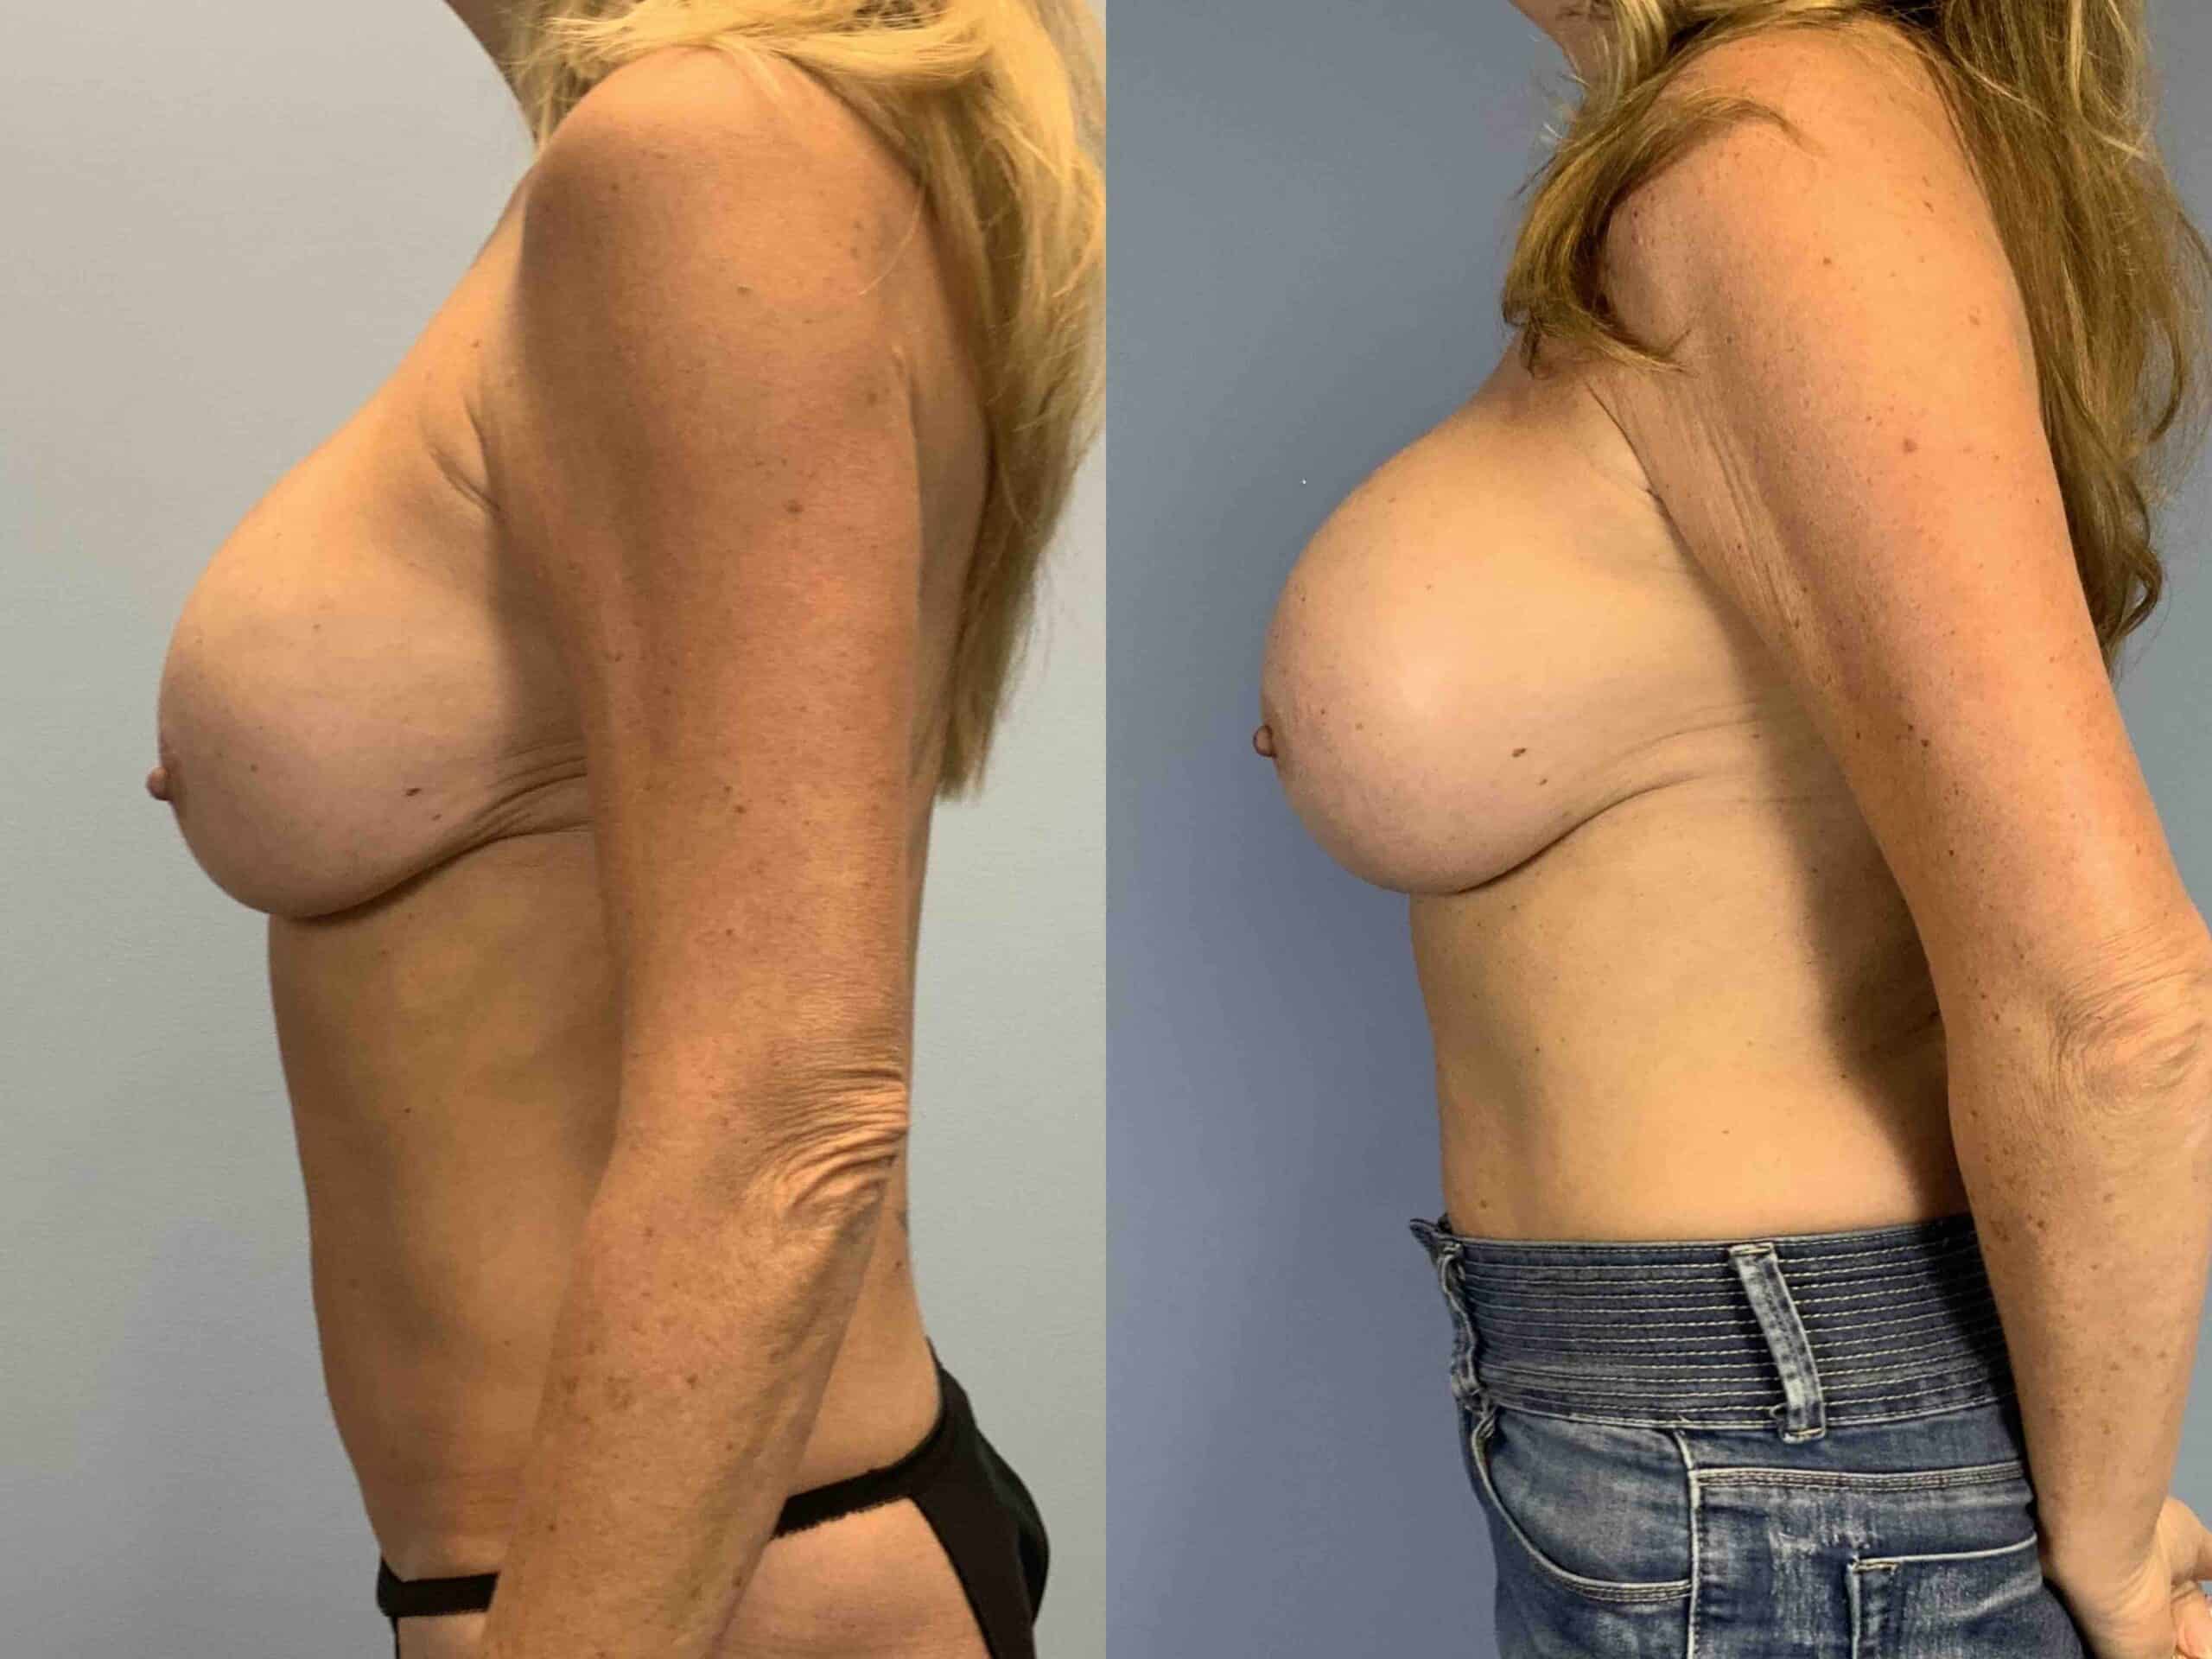 Before and after, patient 2 mo post op from Explant Breast Implant 325 cc, Capsulectomy, Breast Re-Augmentation, Strattice Reinforcement, Level III Muscle Release procedures performed by Dr. Paul Vanek